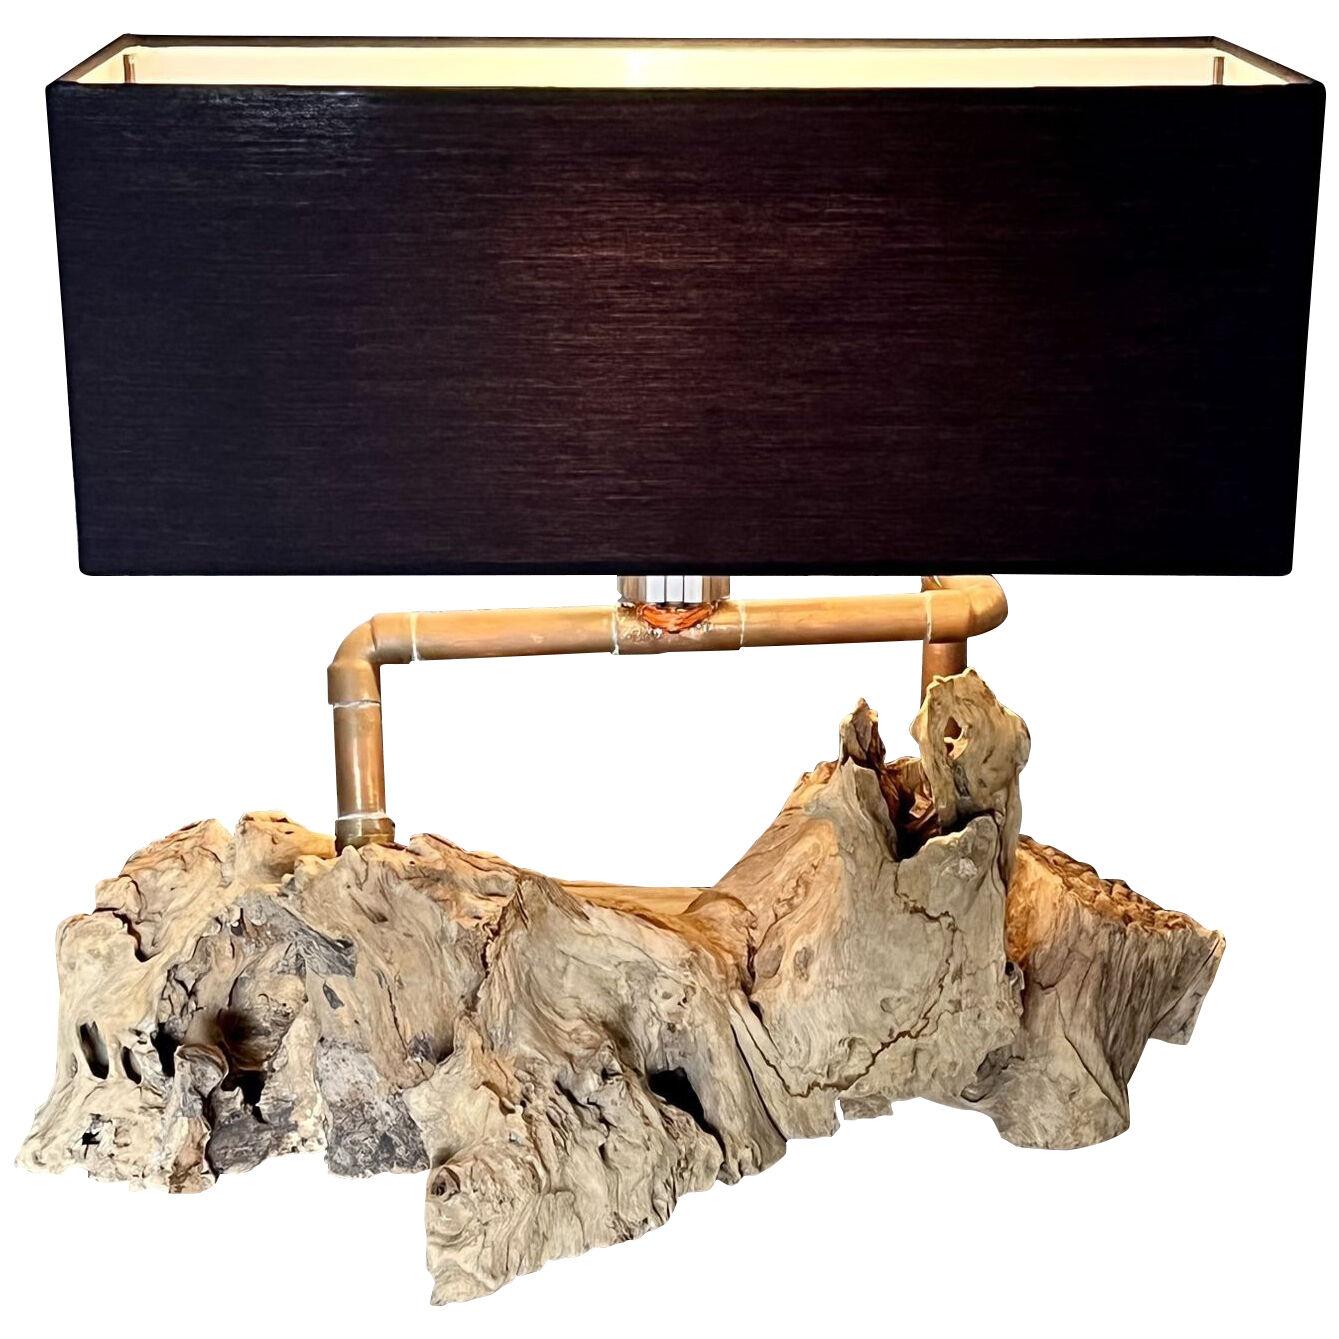 Organic Modern Design Table Lamp Driftwood With Copper Tubes, Austria 2022